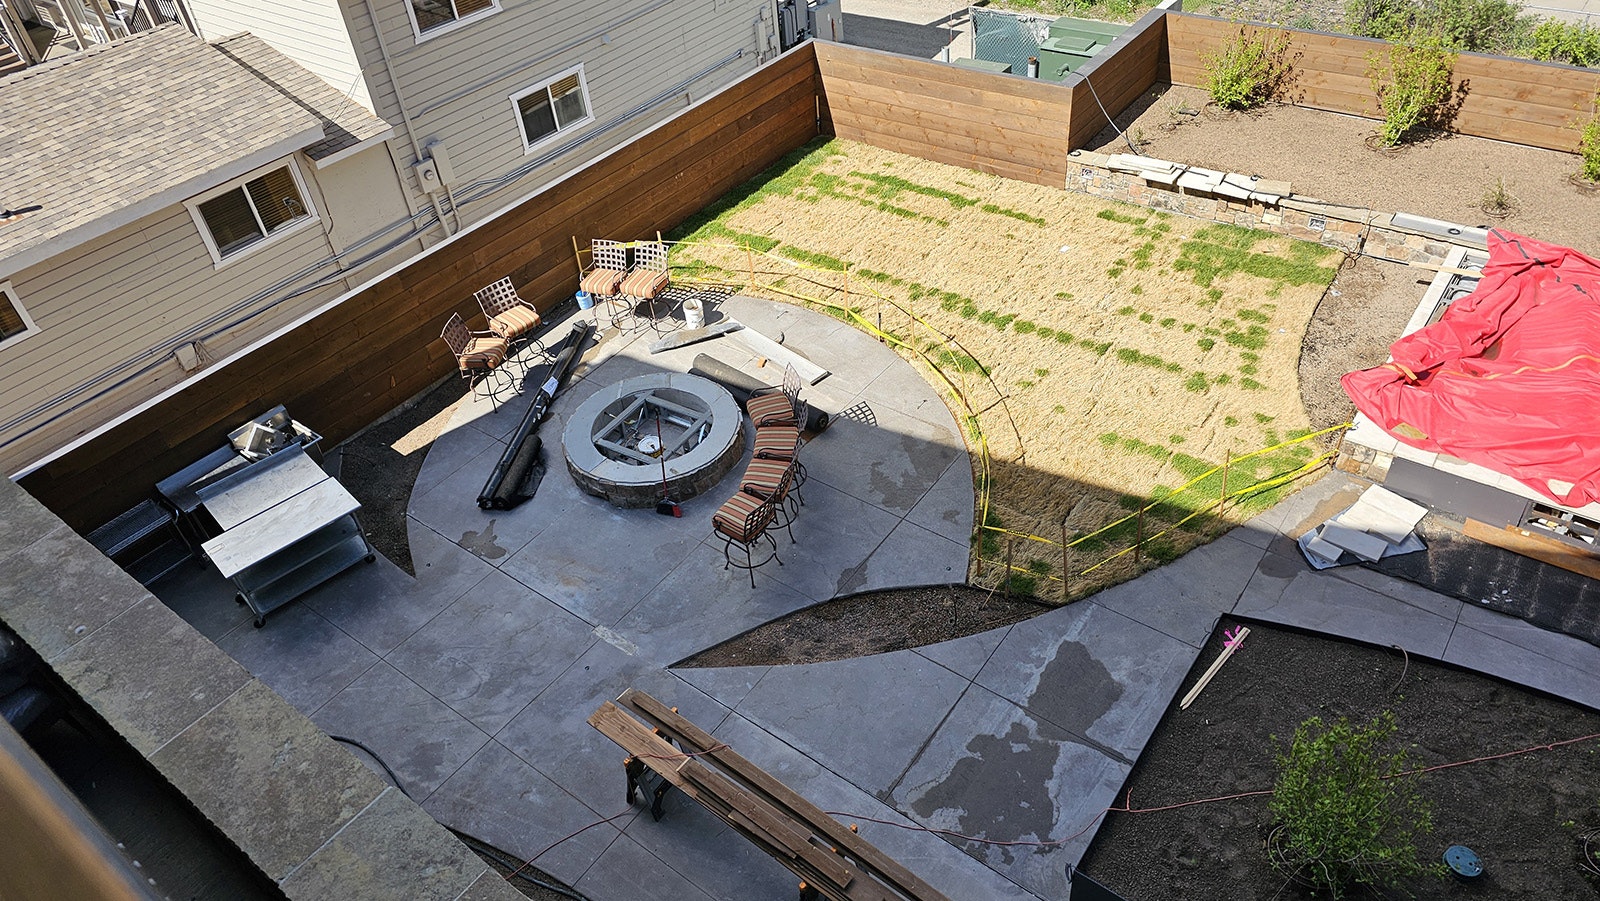 The courtyard includes patio dining space. The chairs ringing the fire pit below will be replaced with Adirondack chairs.